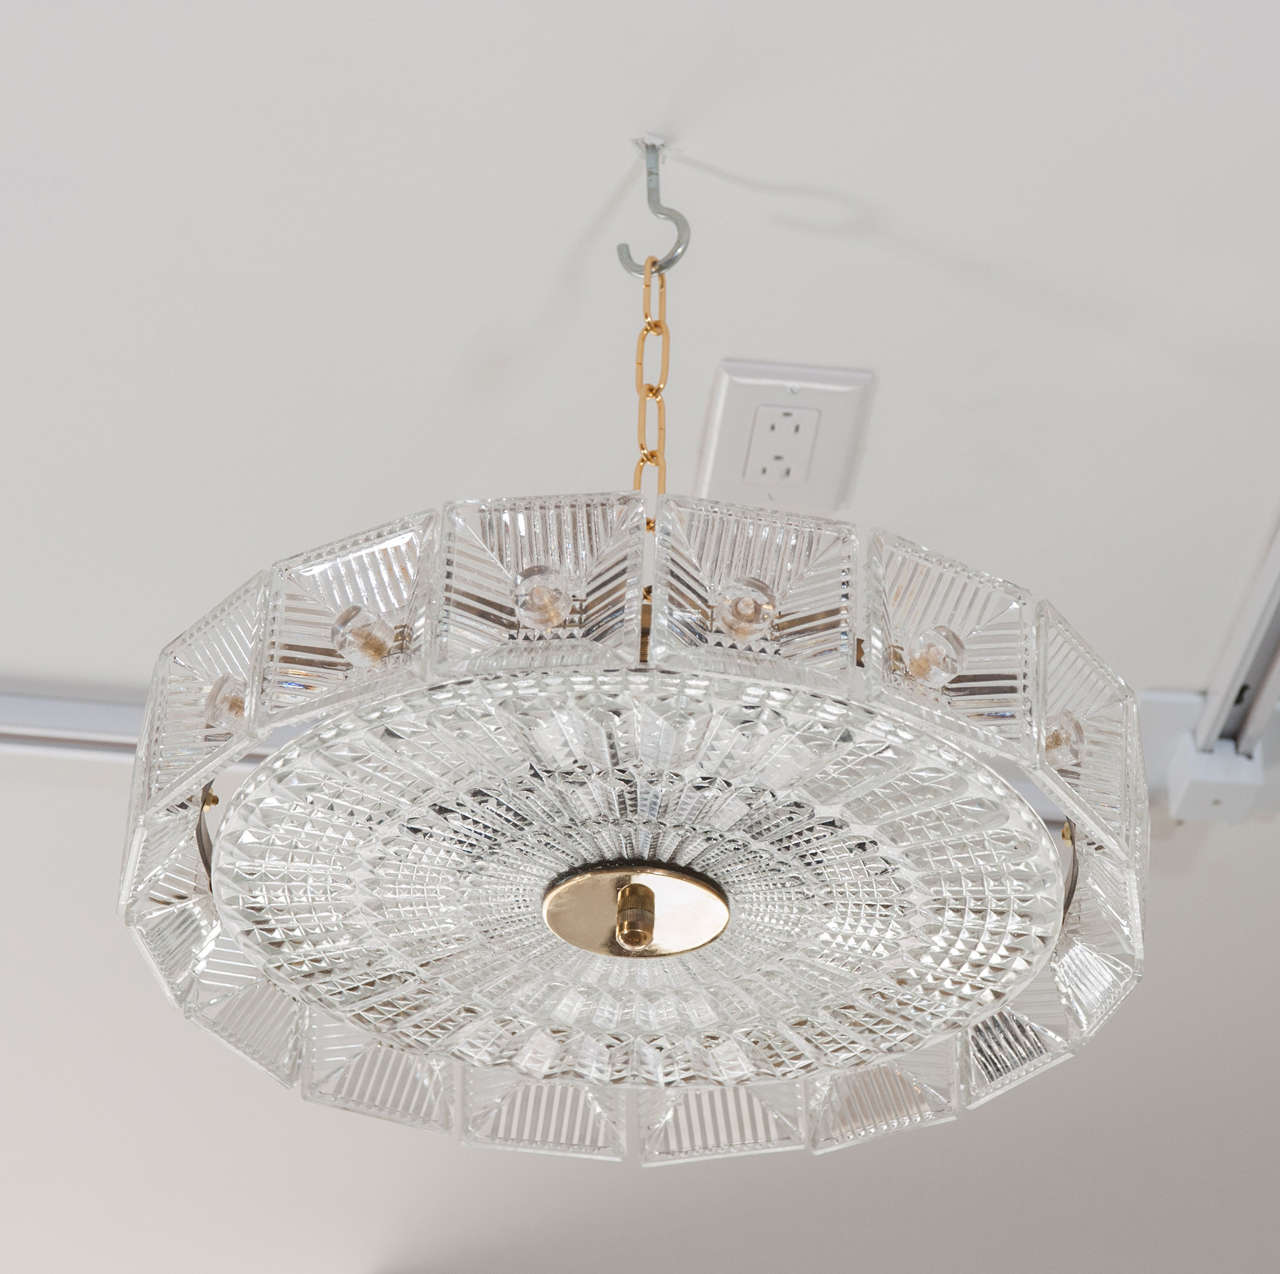 A fabulous and well designed six light flush mount light with moulded glass pieces affixed with lucite decorations.
Rewired for North America.